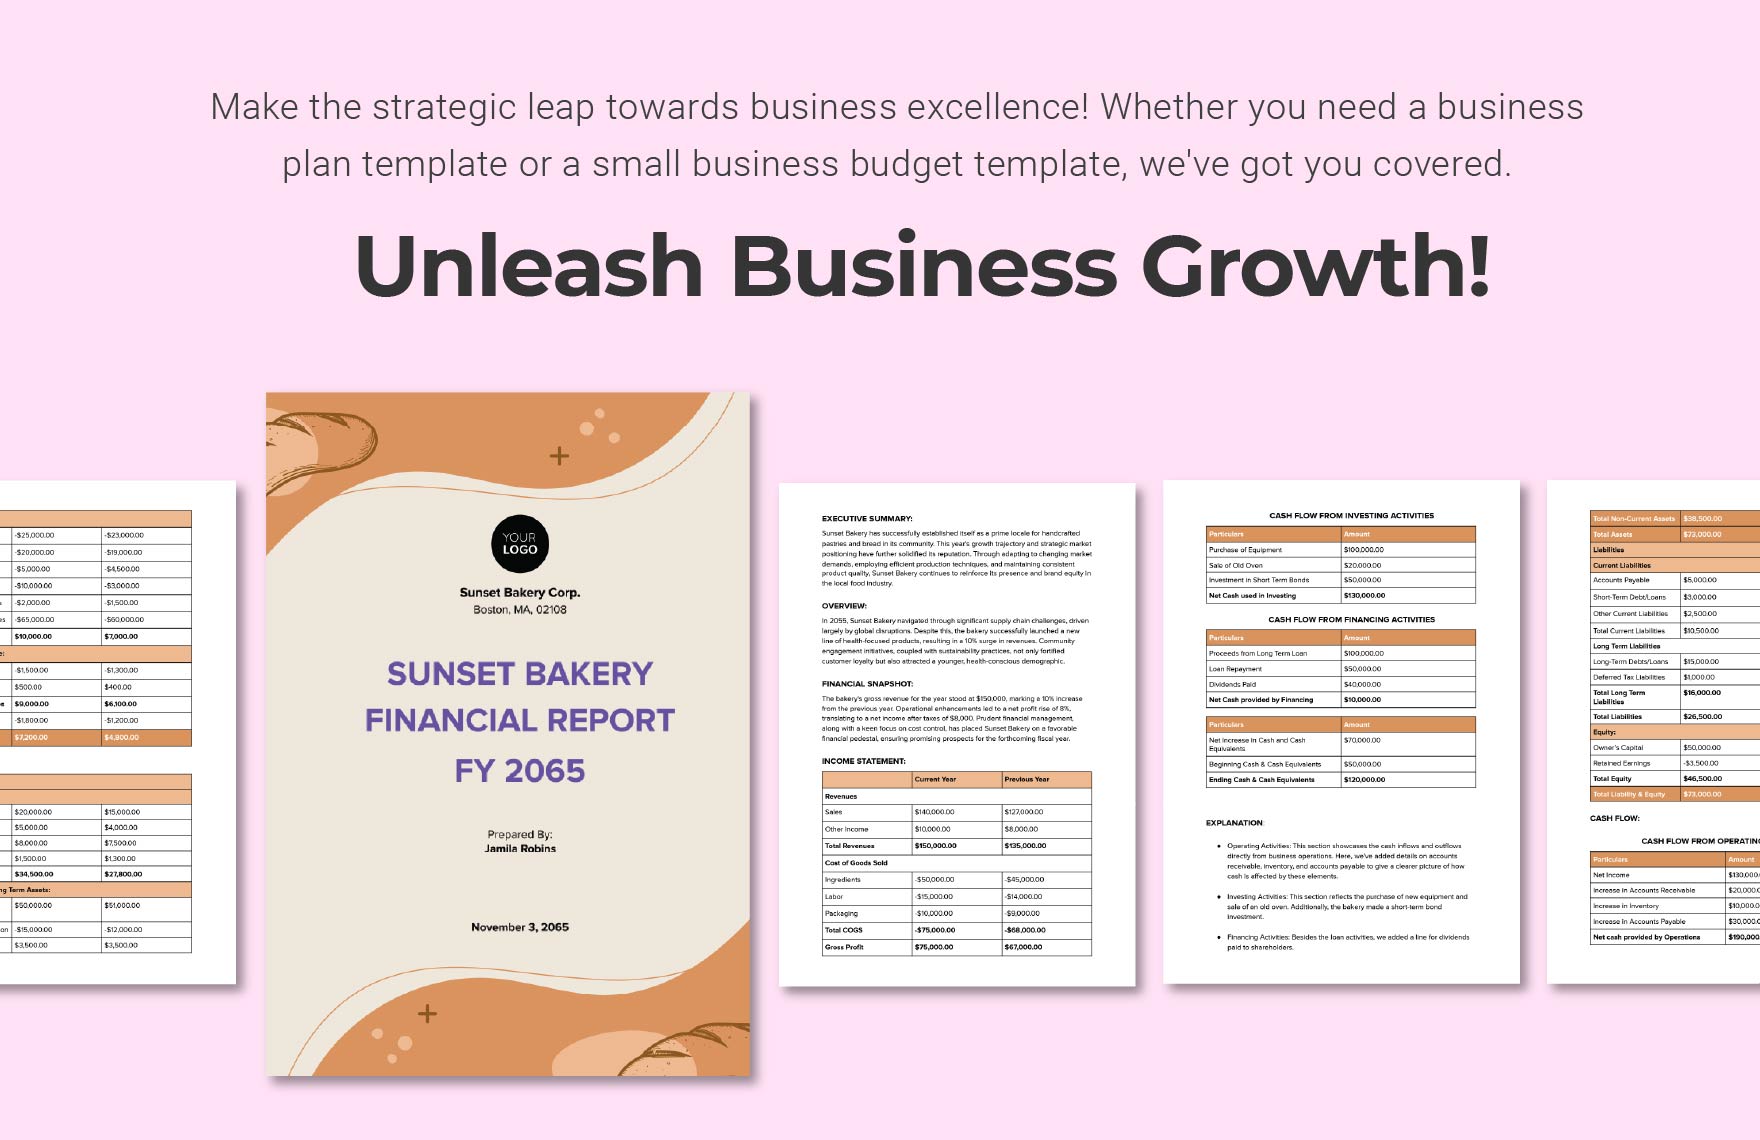 Small Business Financial Report Template